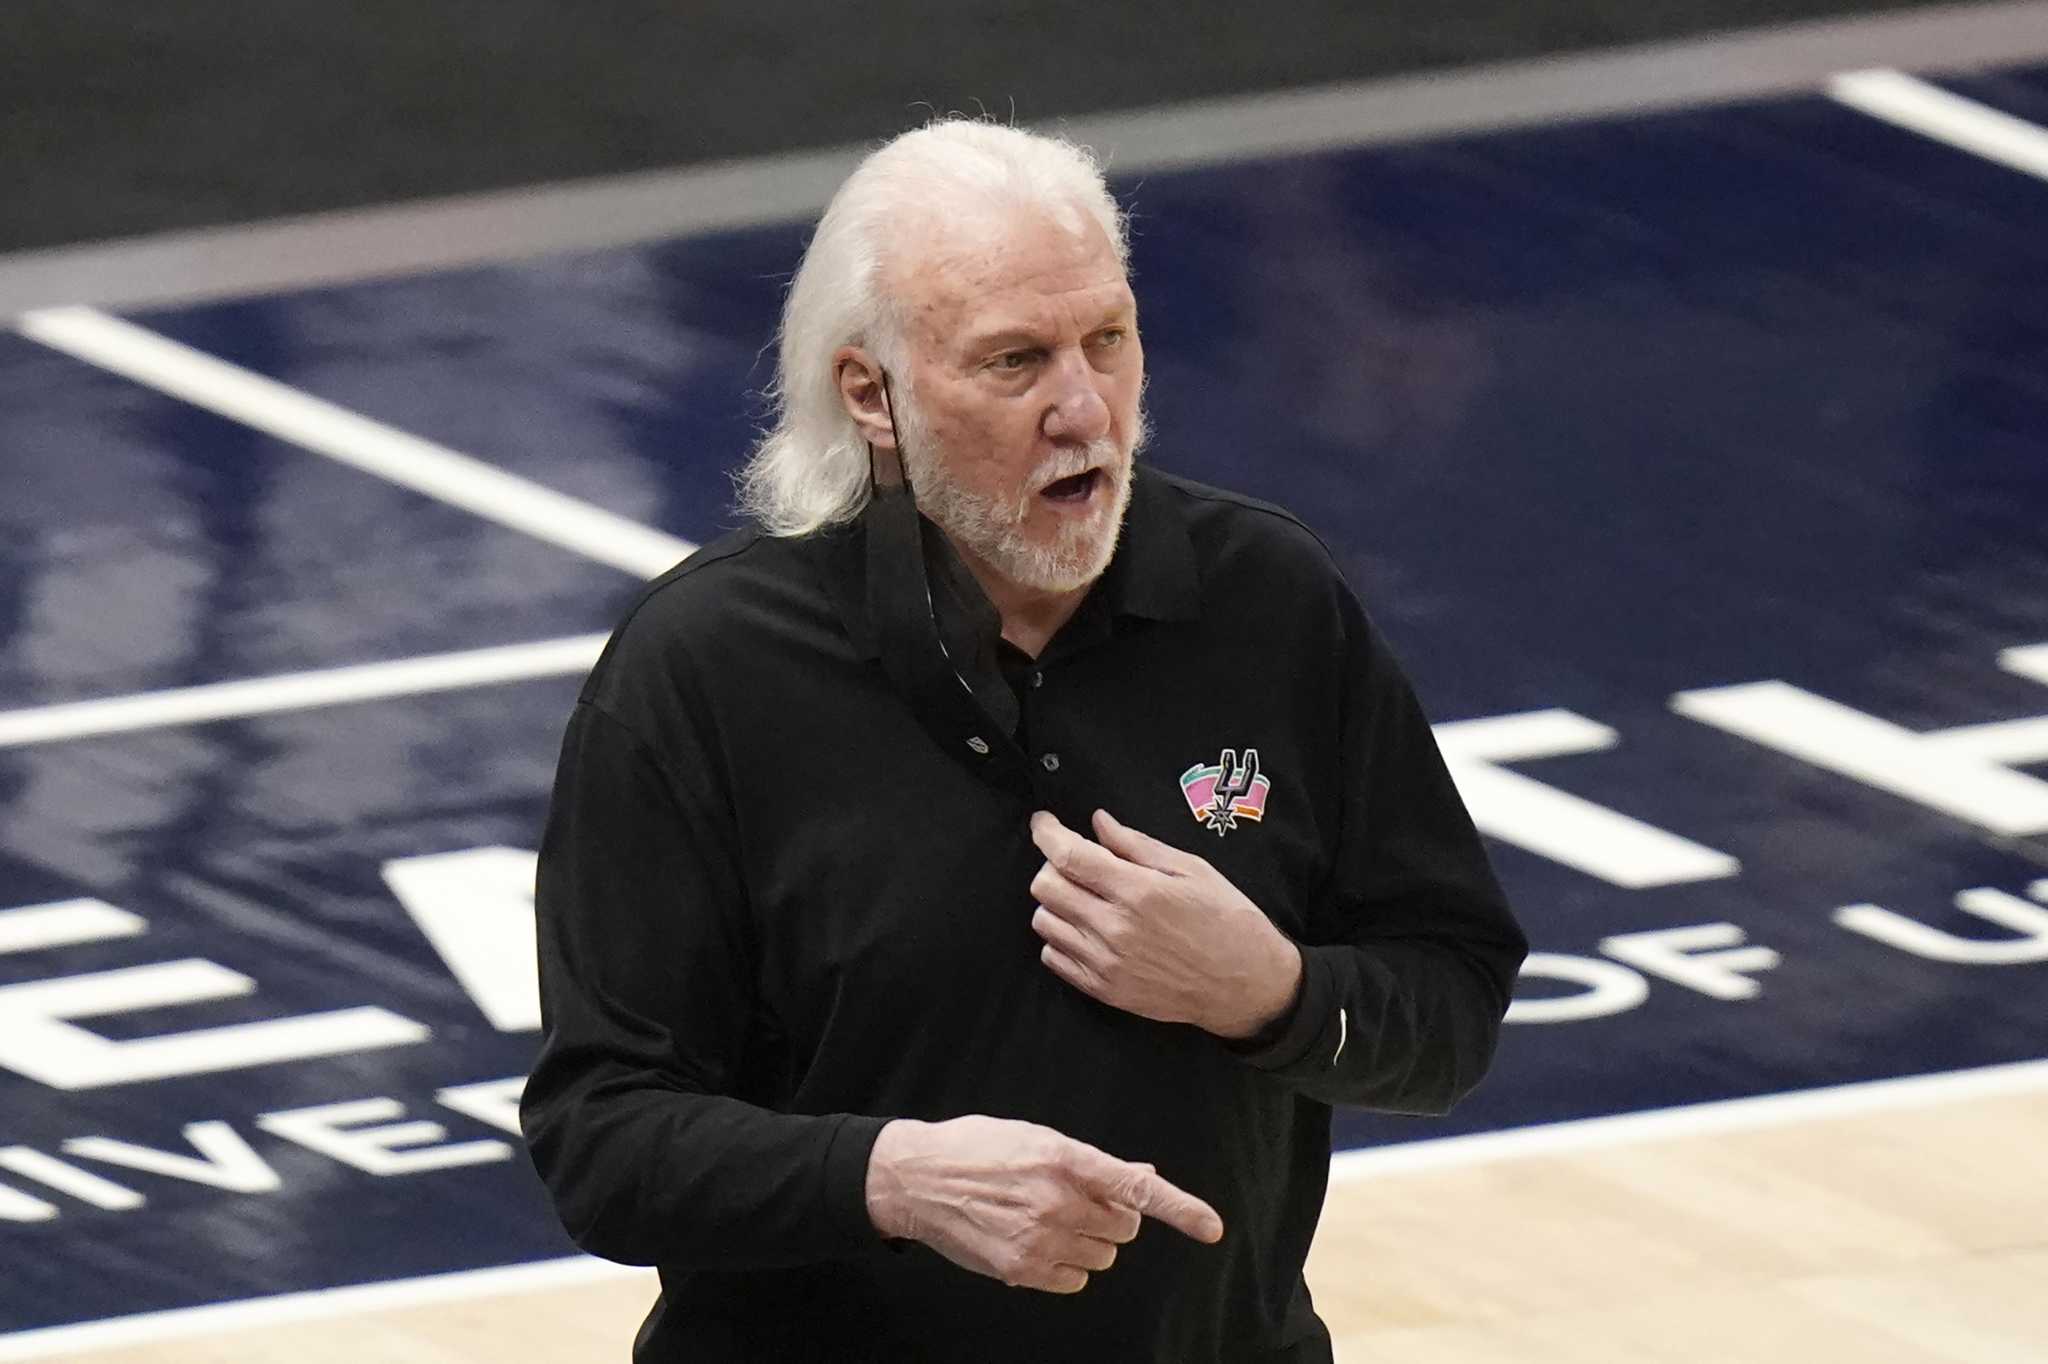 Popovich sends signals he'll continue as Spurs coach